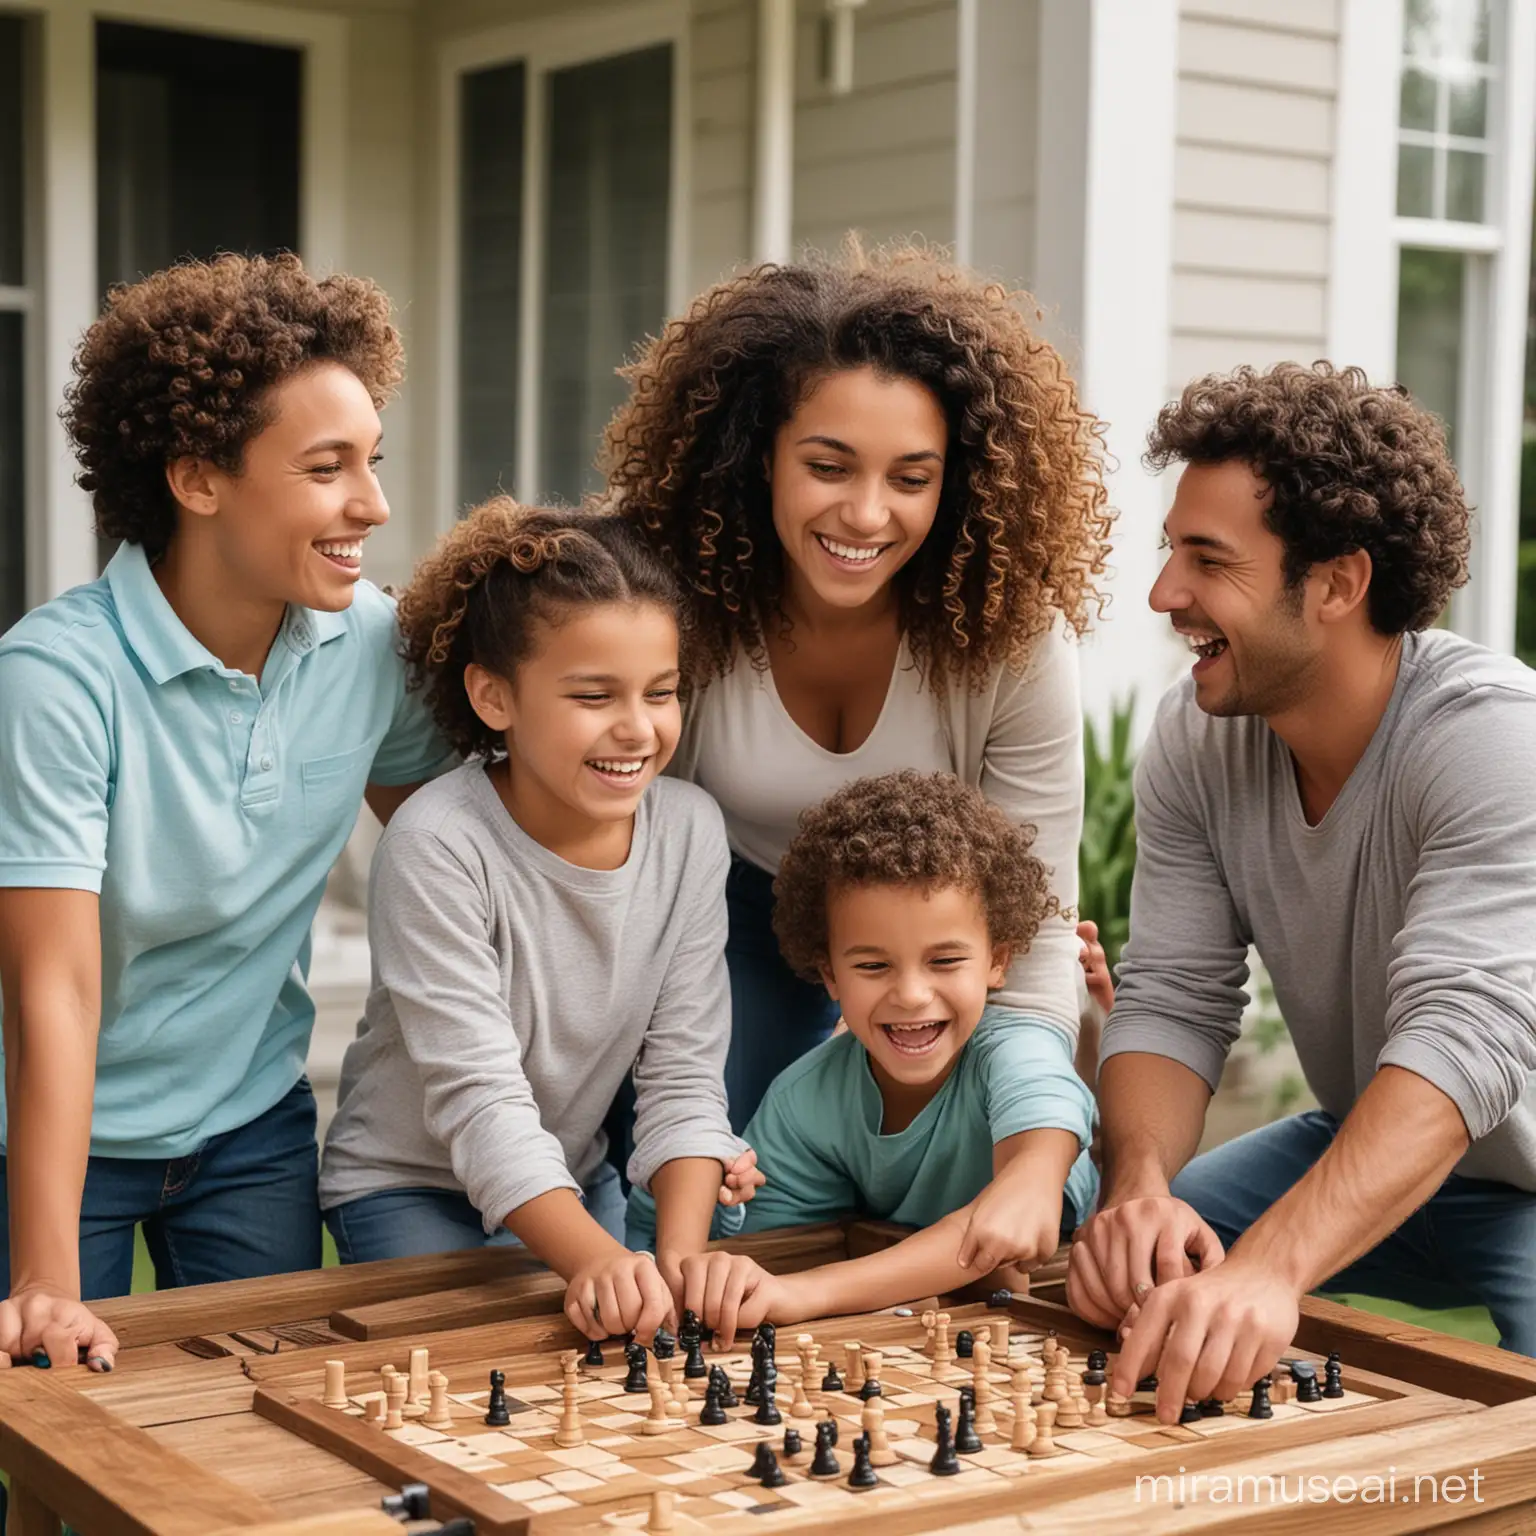 A 30 year old woman with curly hair with her three children and her men  Husband in their beautiful home play games outside